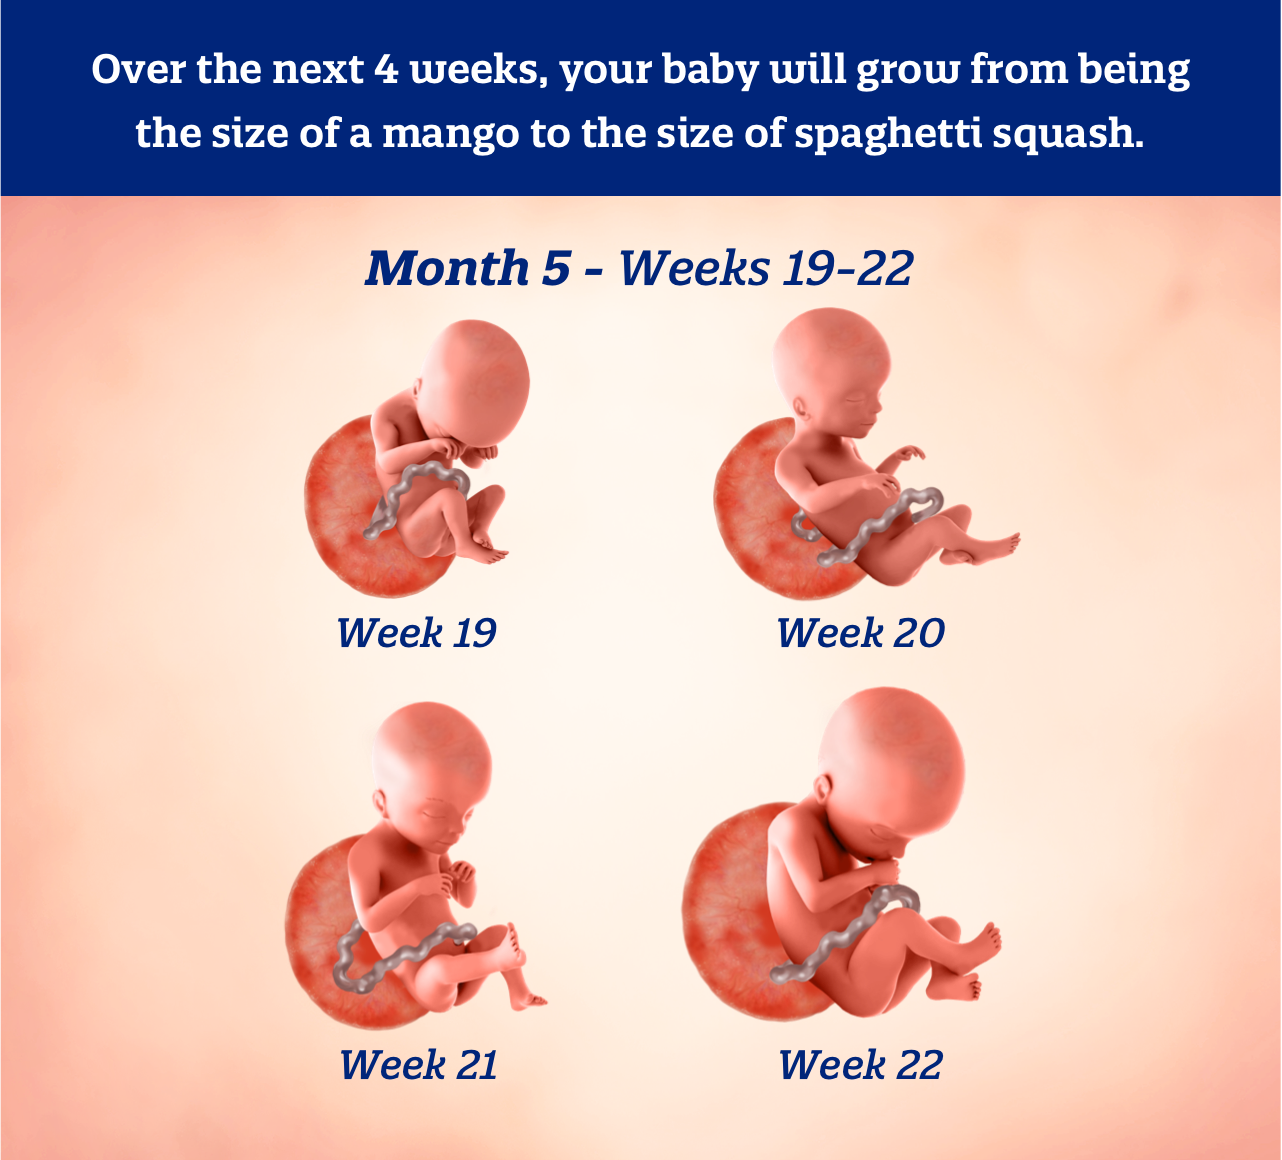 Month 5 weeks 19-22: Over the next 4 weeks, your baby will grow from being the size of a mango to the size of spaghetti squash.